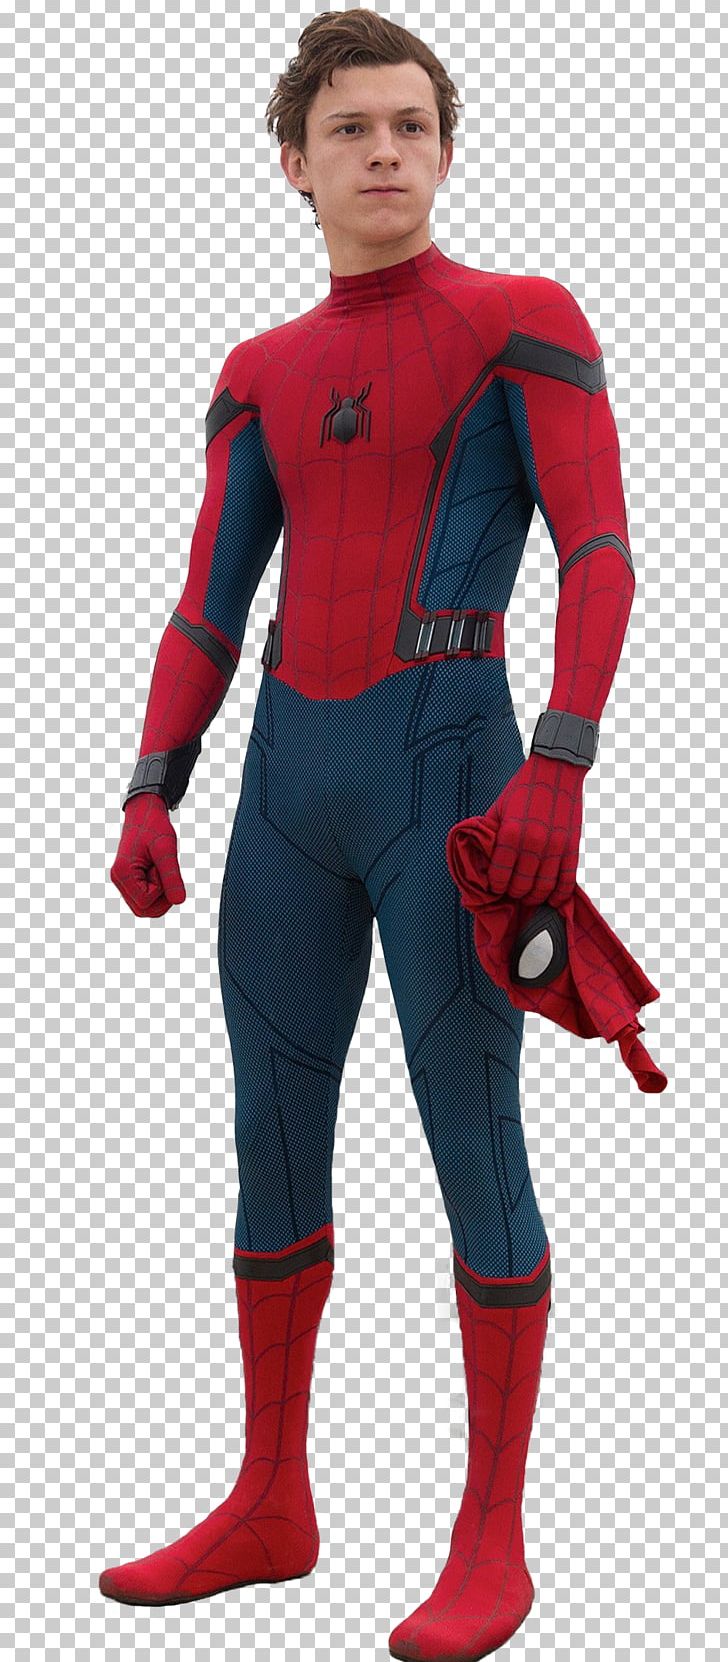 Tom Holland Spider-Man: Homecoming Film Series Marvel Cinematic Universe PNG, Clipart, Avengers, Boy, Costume, Dry Suit, Electric Blue Free PNG Download